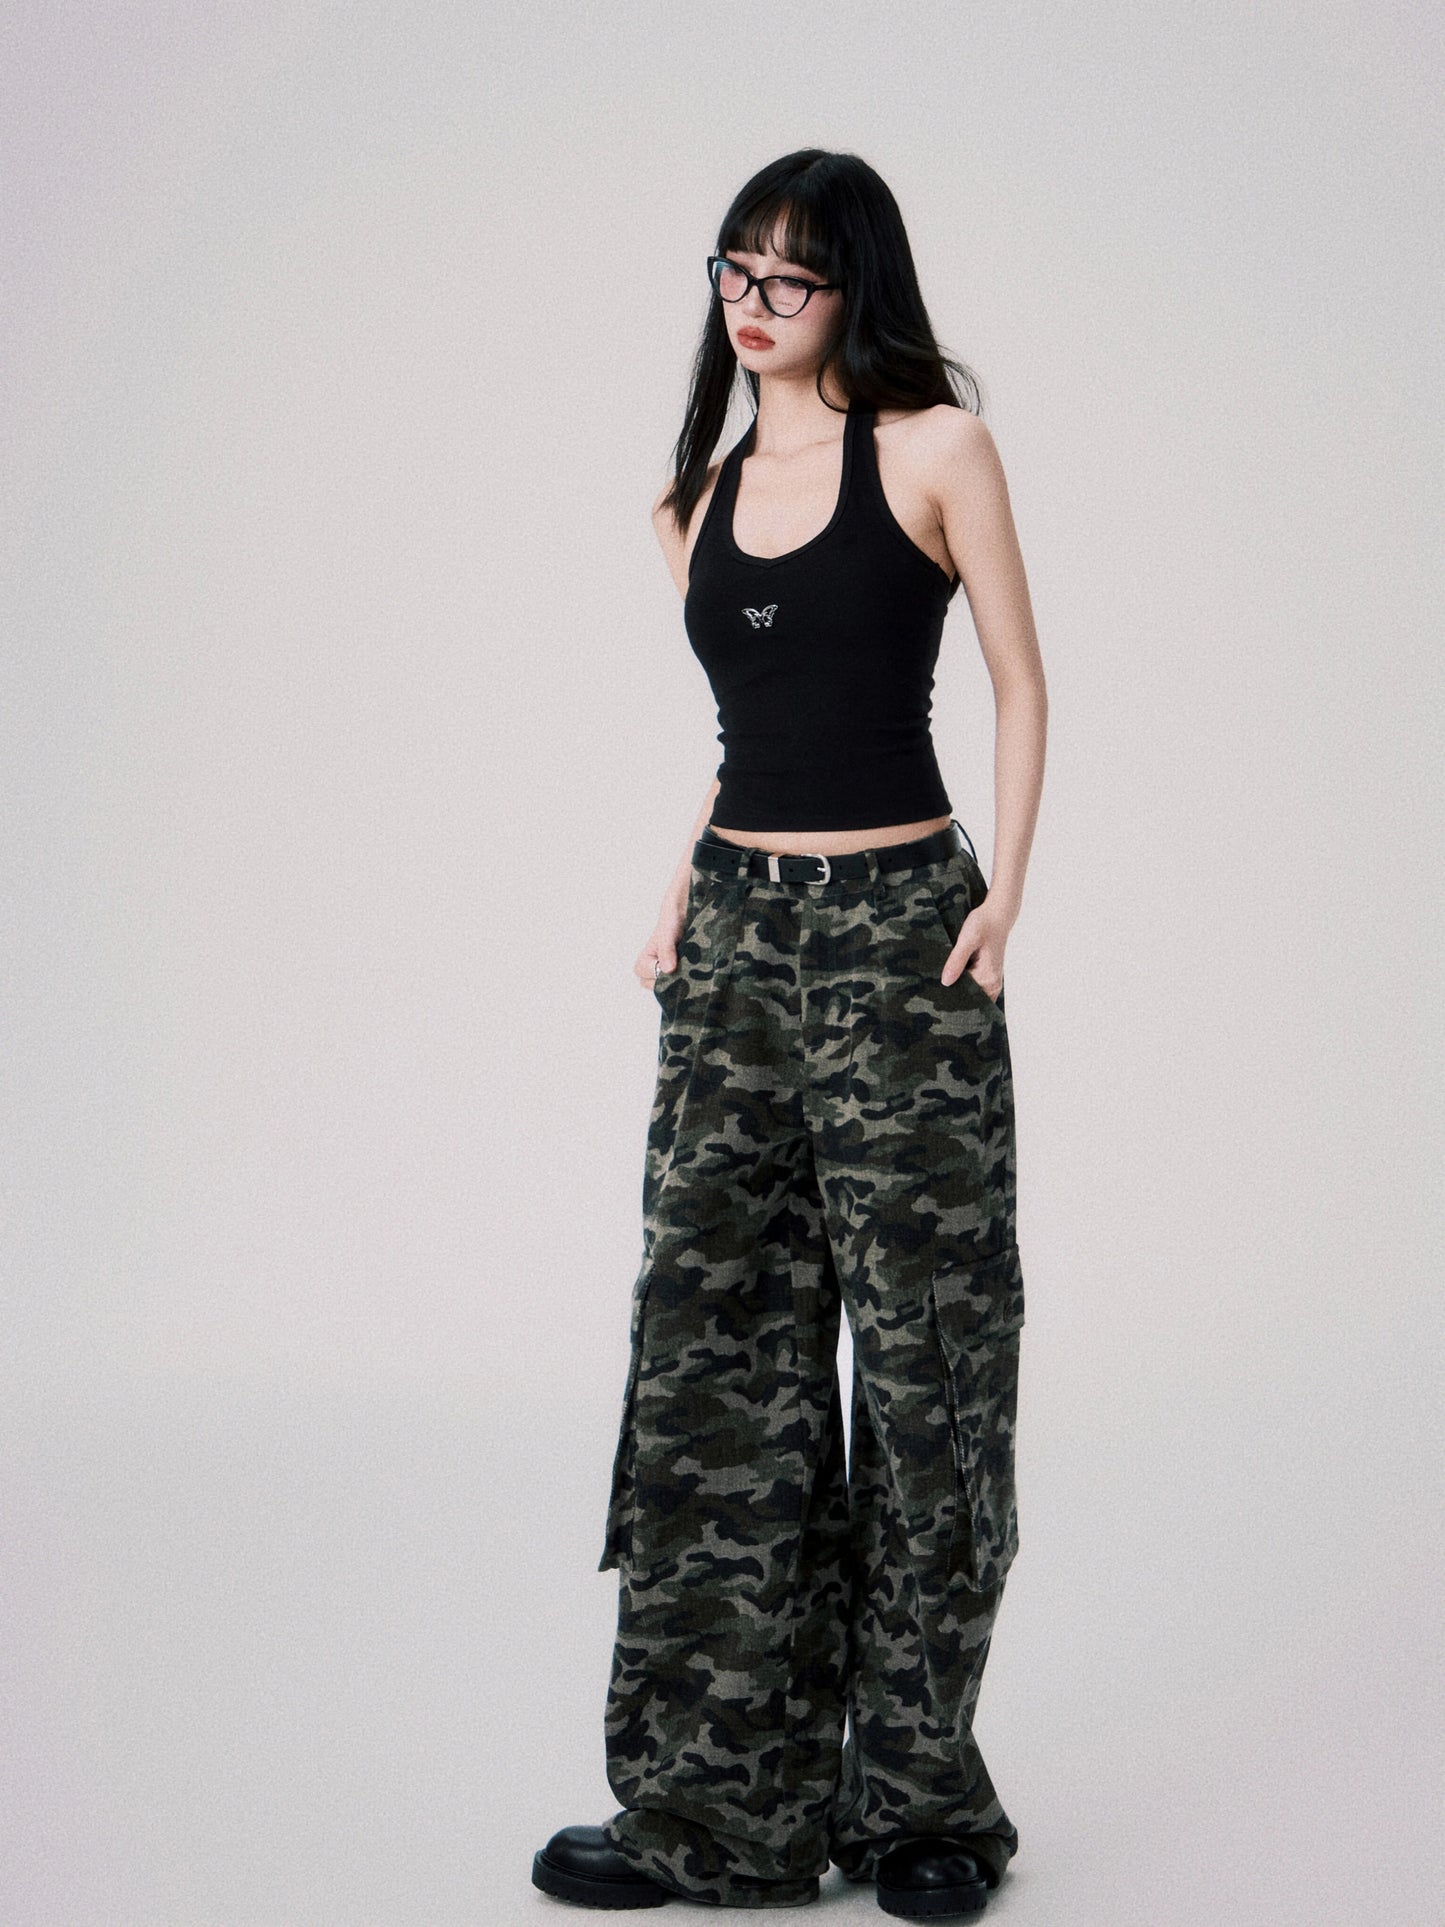 Loose Camouflage Cargo Pants - Casual Cool